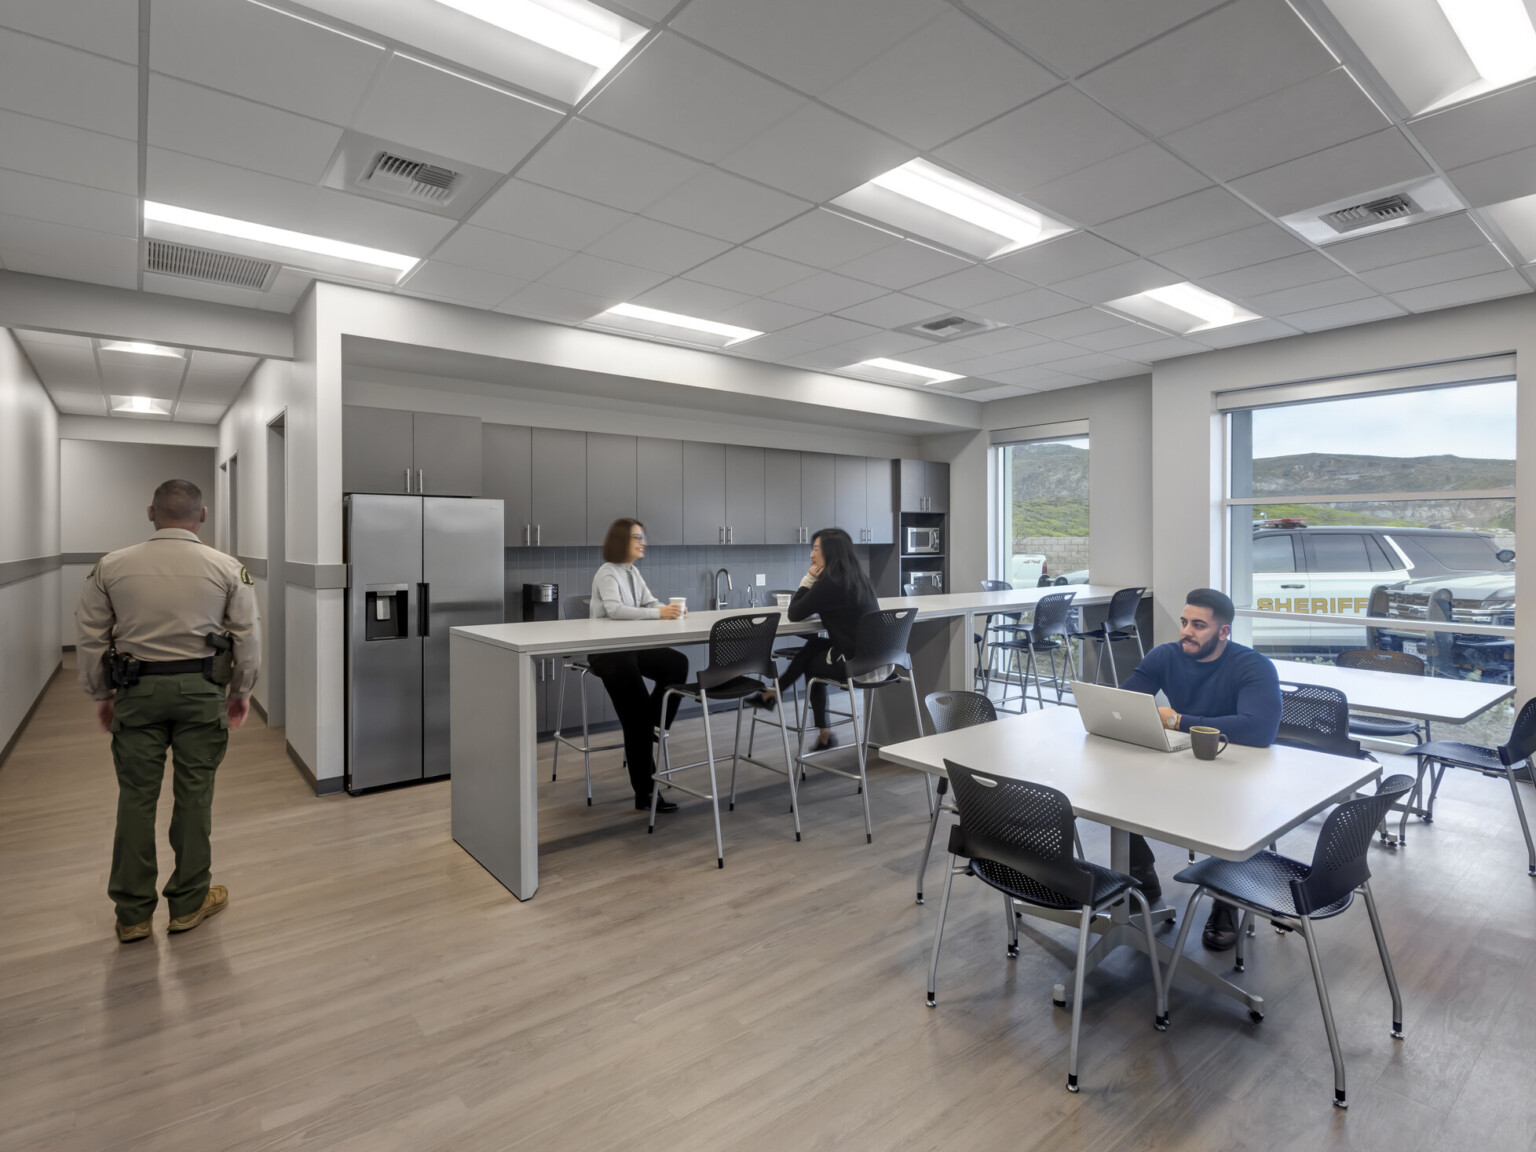 People congregating in renovated break room with kitchen amenities, large windows, day lit, dining tables and seating